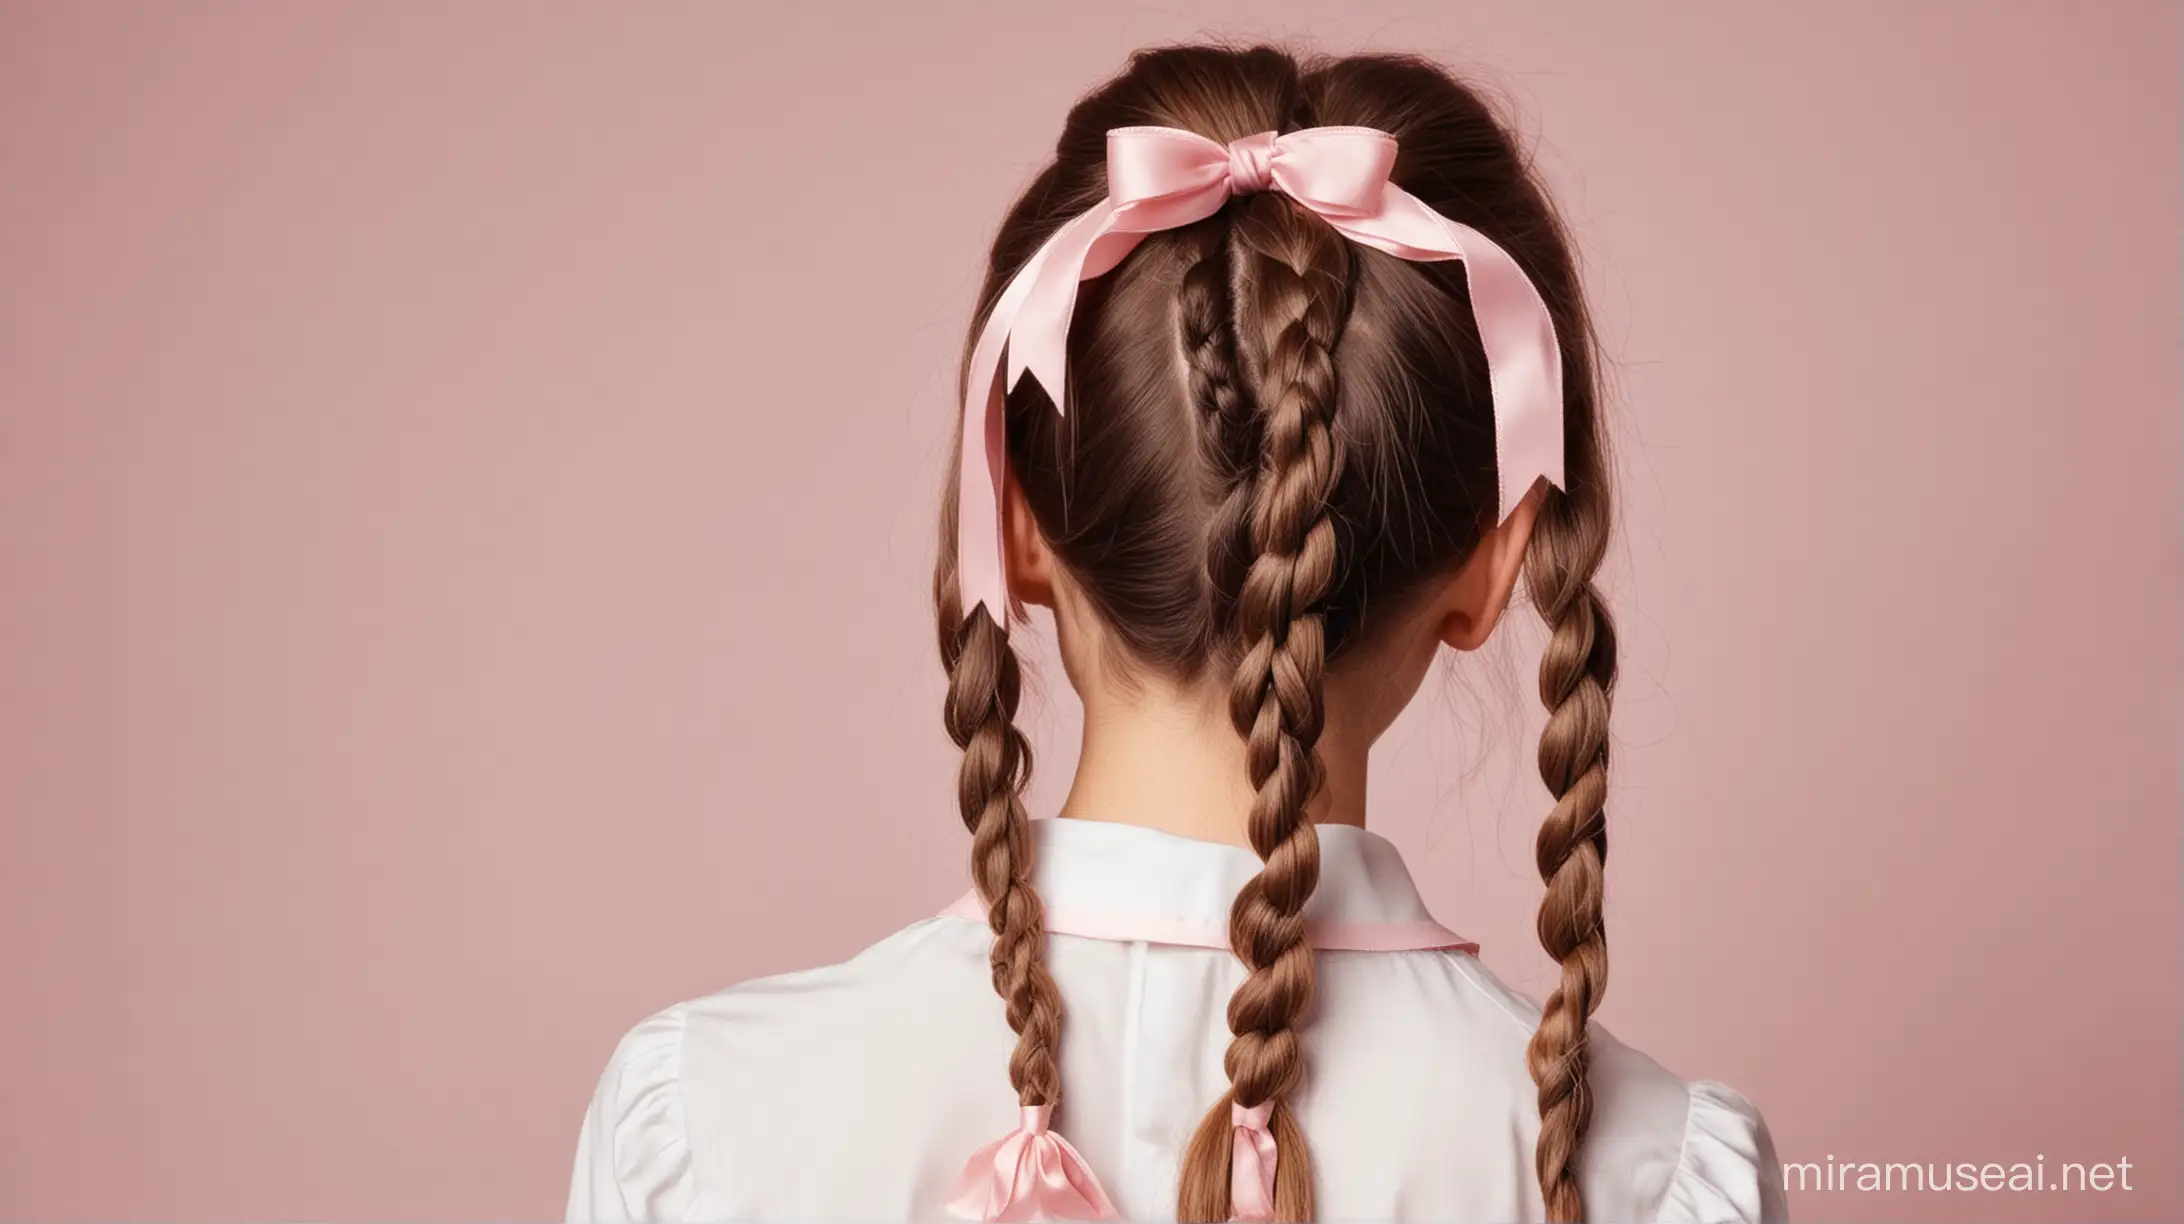 Cheerful Girl with Pigtails and Ribbon Bows Hairstyle